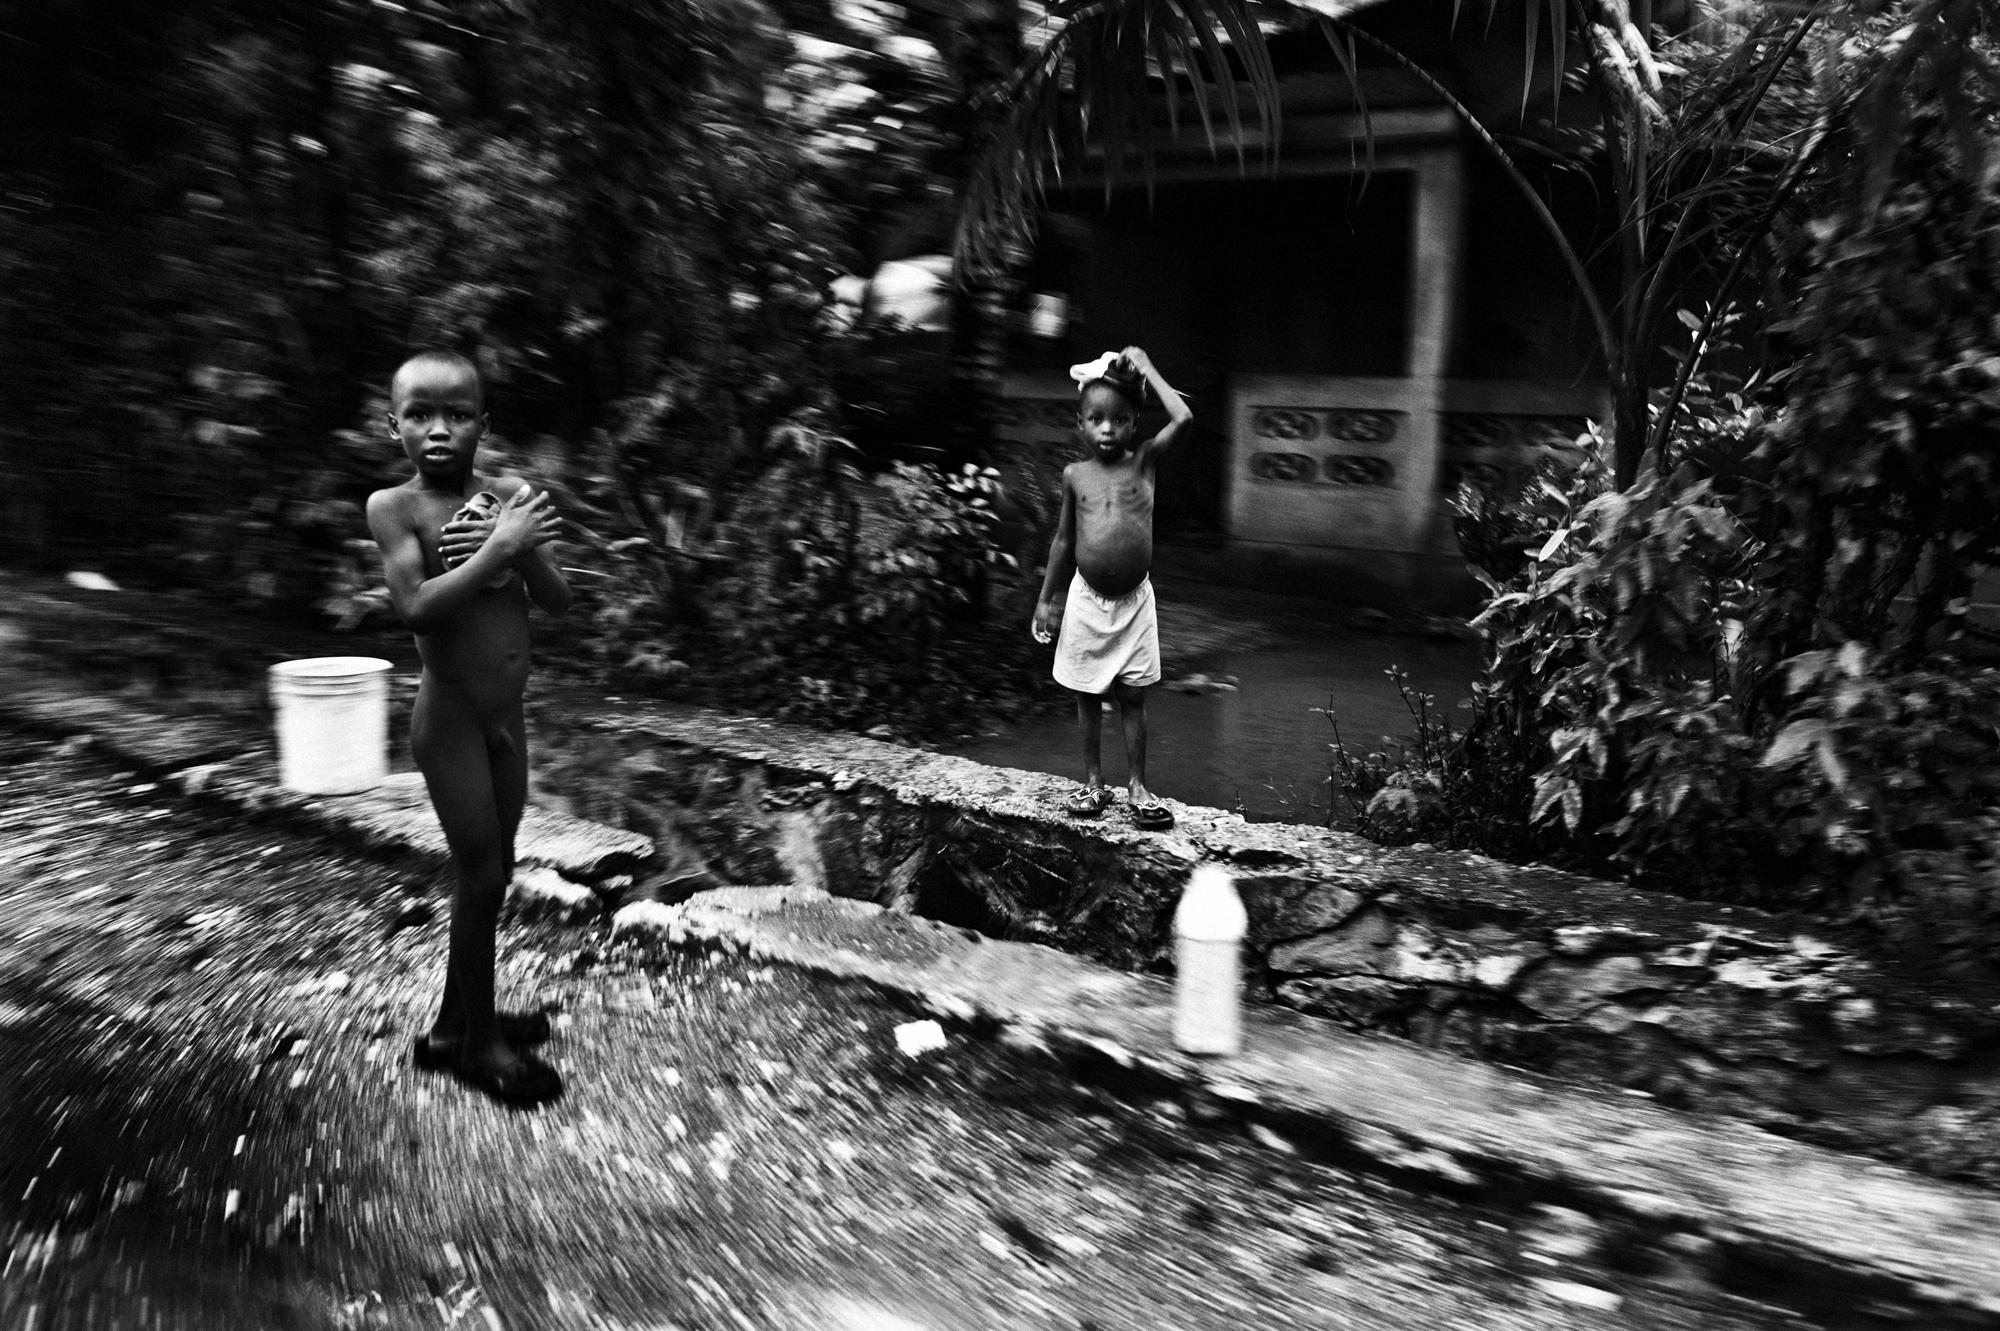 Private hell - Petit Guave.June 2010.Children in Petit Guave washing...